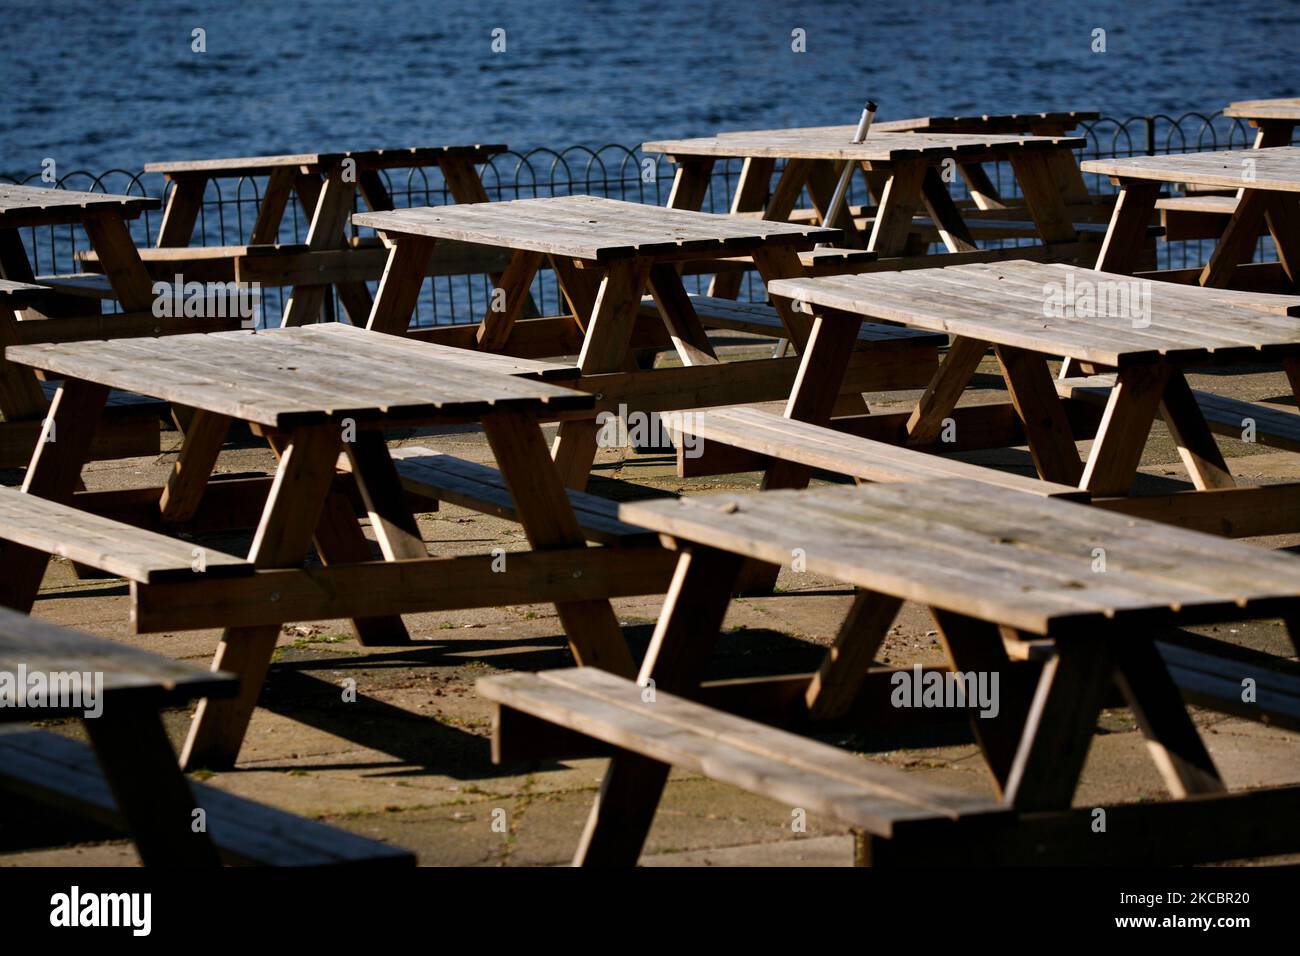 Empty tables sit out in the temporarily-closed outdoor seating area of a cafe beside the Serpentine lake in Hyde Park in London, England, on March 29, 2021. Lockdown restrictions were eased across England today, with the 'stay home' rule ended, groups of up to six allowed to meet outside, outdoor sports restarted and weddings with up to six people attending permitted to go ahead. Shops, hospitality and leisure businesses remain closed however, with the next relaxation of restrictions not due until April 12 at the earliest. Today's easing has meanwhile coincided with the first of a three-day 'm Stock Photo